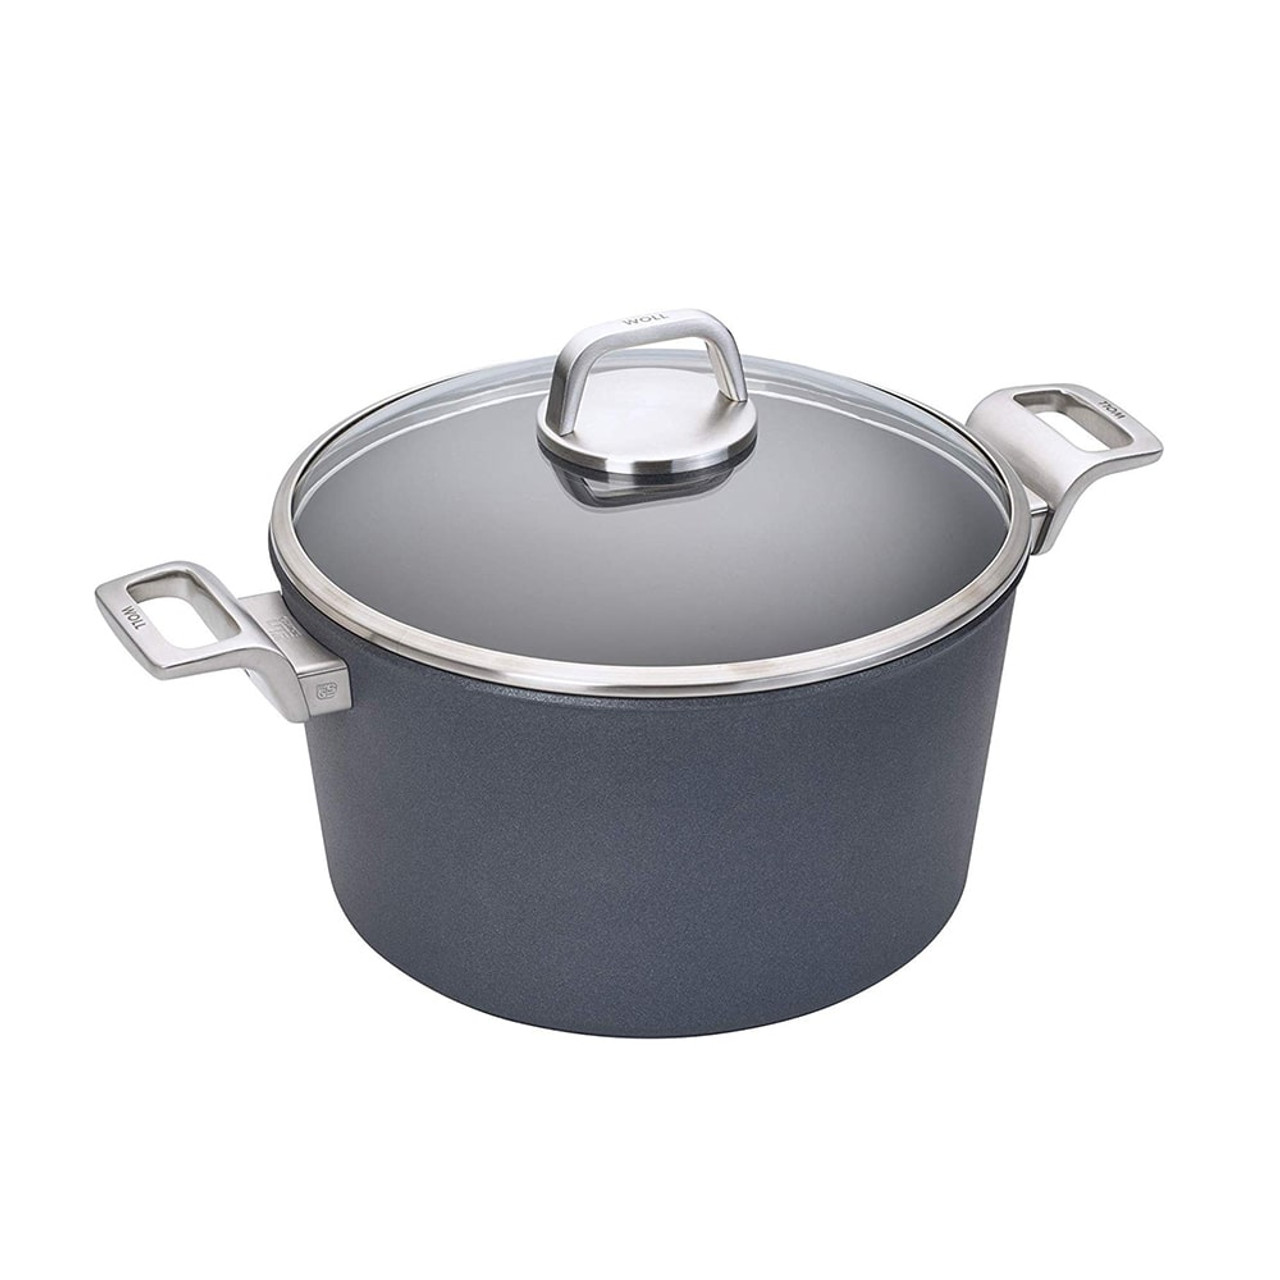 https://cdn11.bigcommerce.com/s-hccytny0od/images/stencil/1280x1280/products/3548/12656/woll-diamond-lite-pro-induction-stockpot-3qt__58194.1600983731.jpg?c=2?imbypass=on